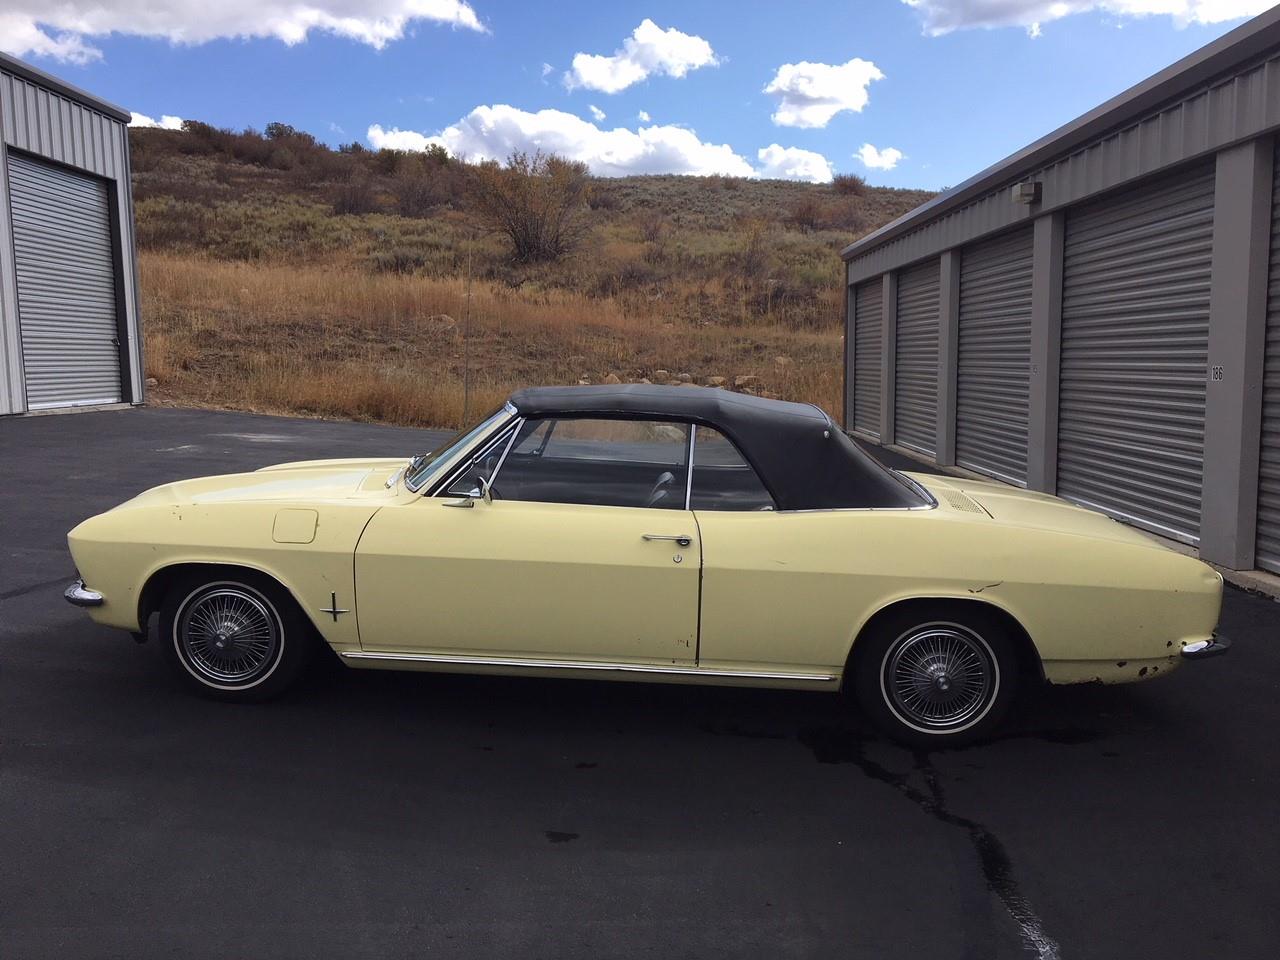 1967 Chevrolet Corvair Monza for sale in Steamboat Springs, CO